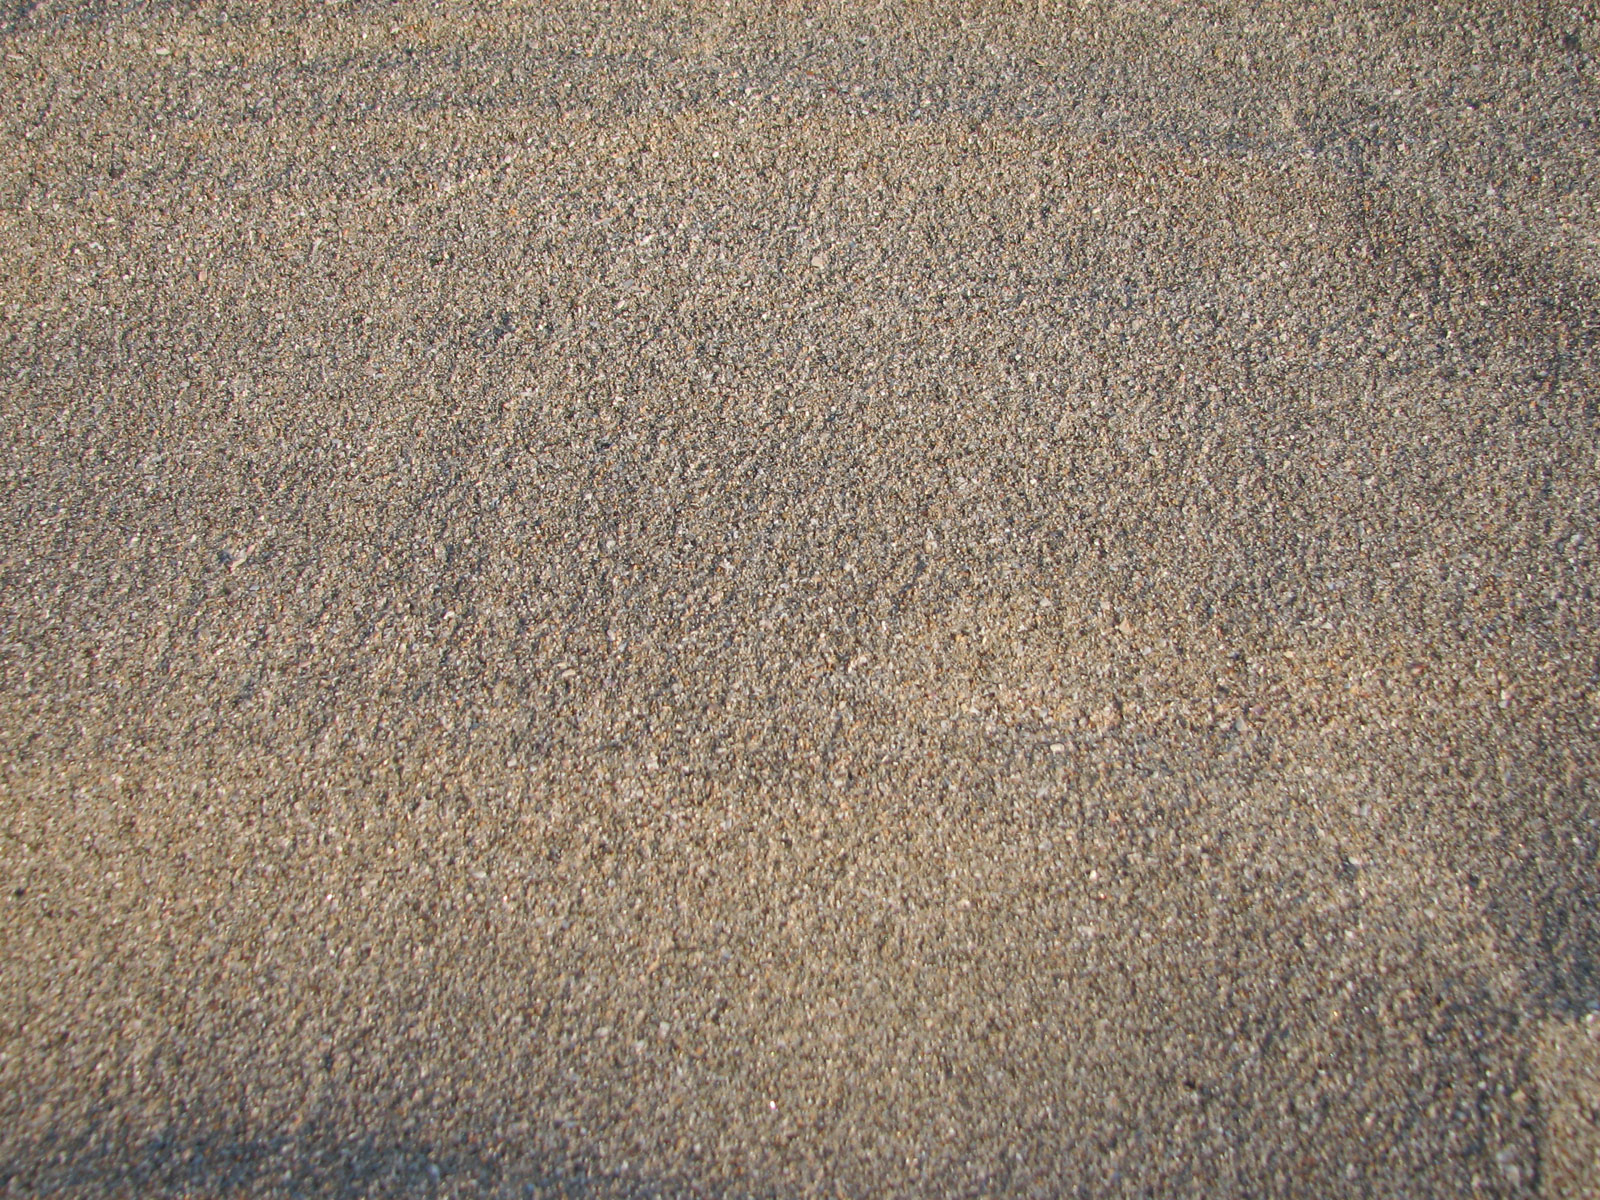 Sand-10 for 1600 x 1200 resolution